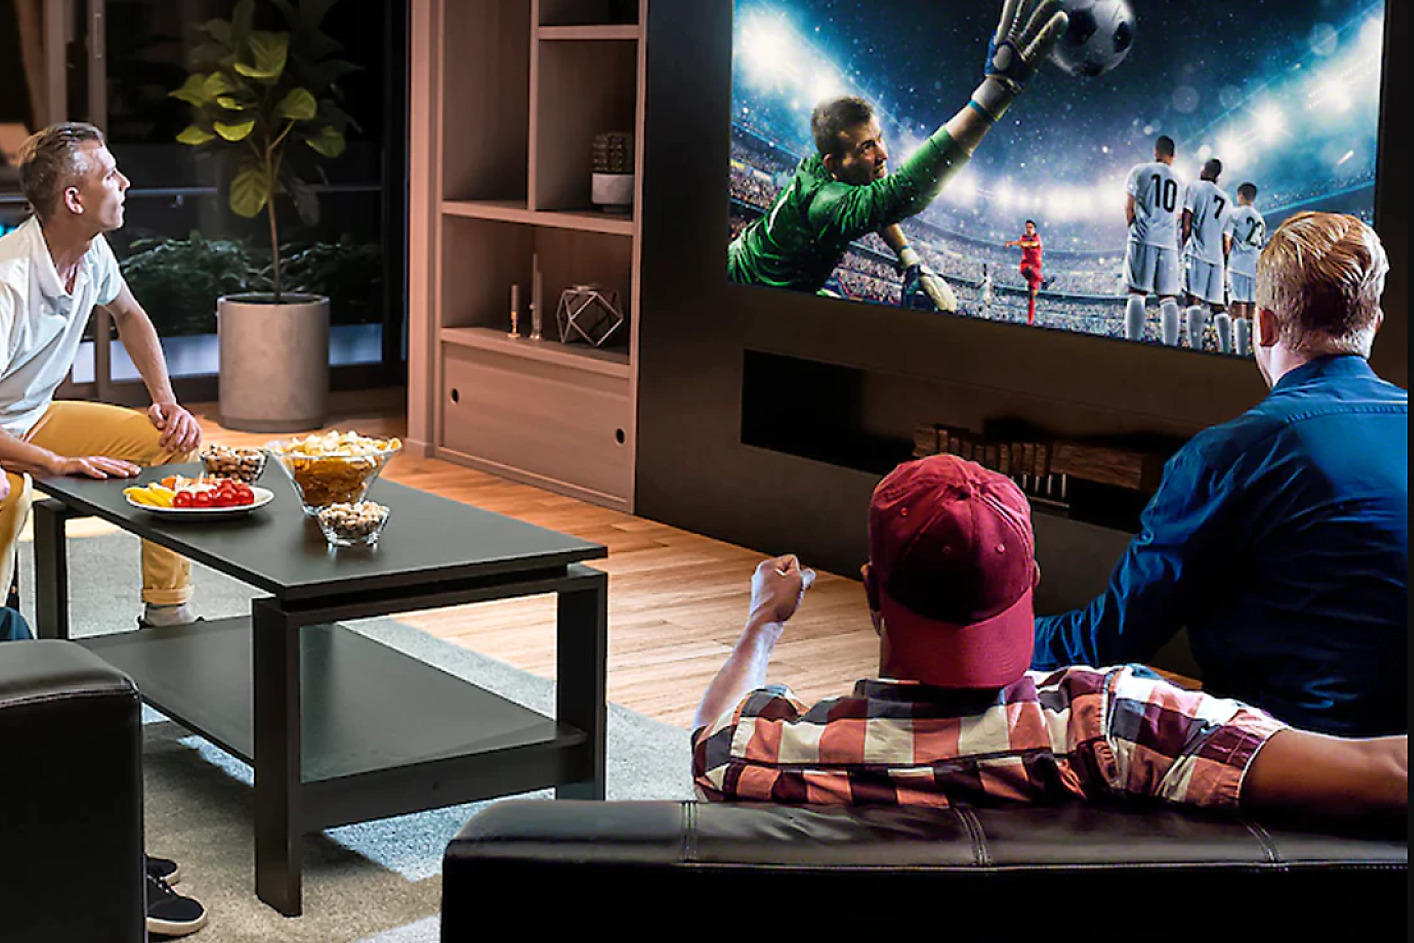 Three people in a living room watch a TV displaying a goalie jumping to catch a soccer ball.